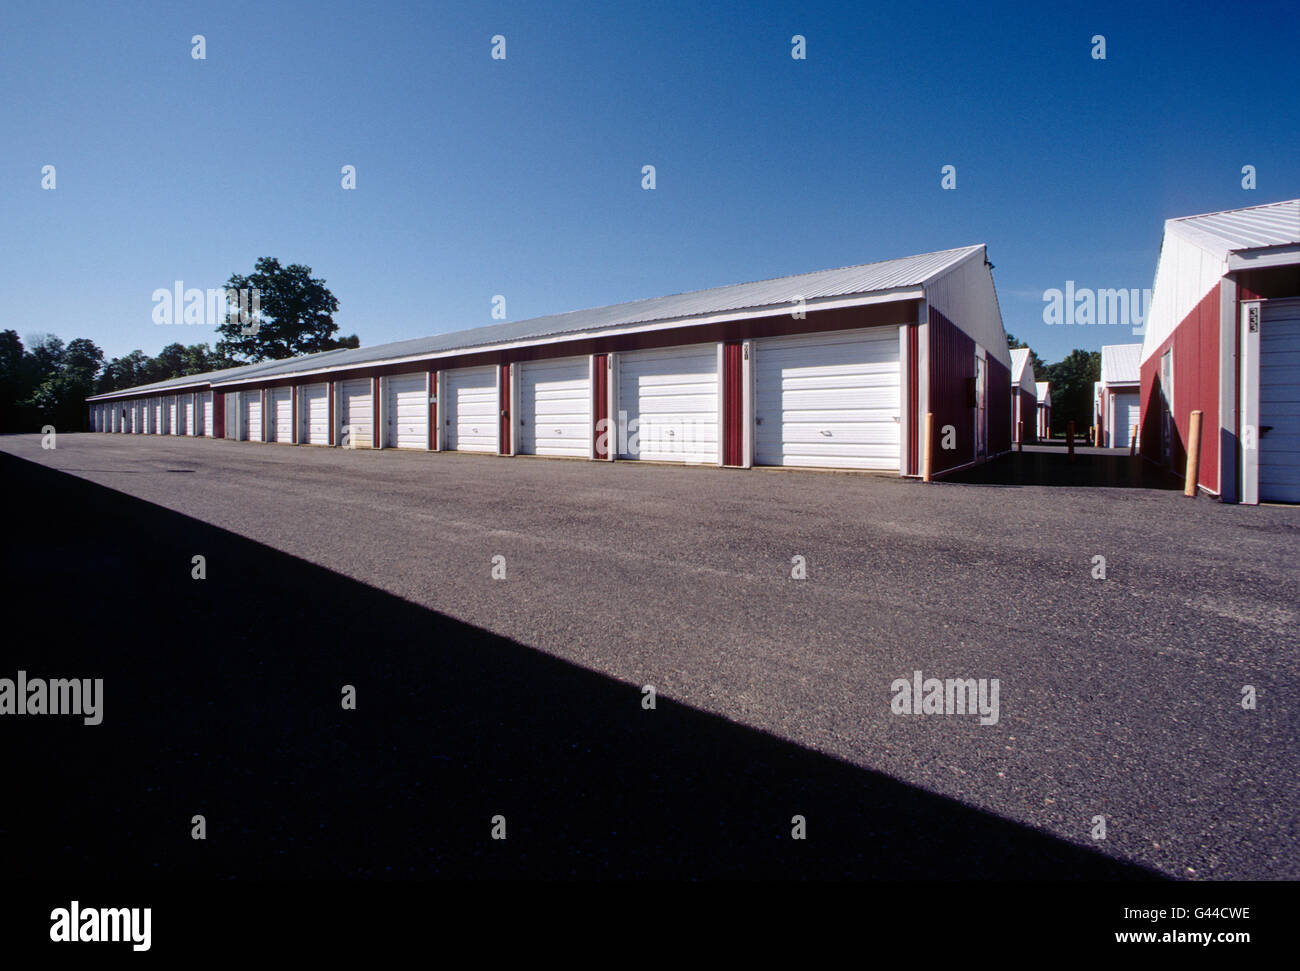 Daytime view of garage like rental storage units lined up in a row Stock Photo